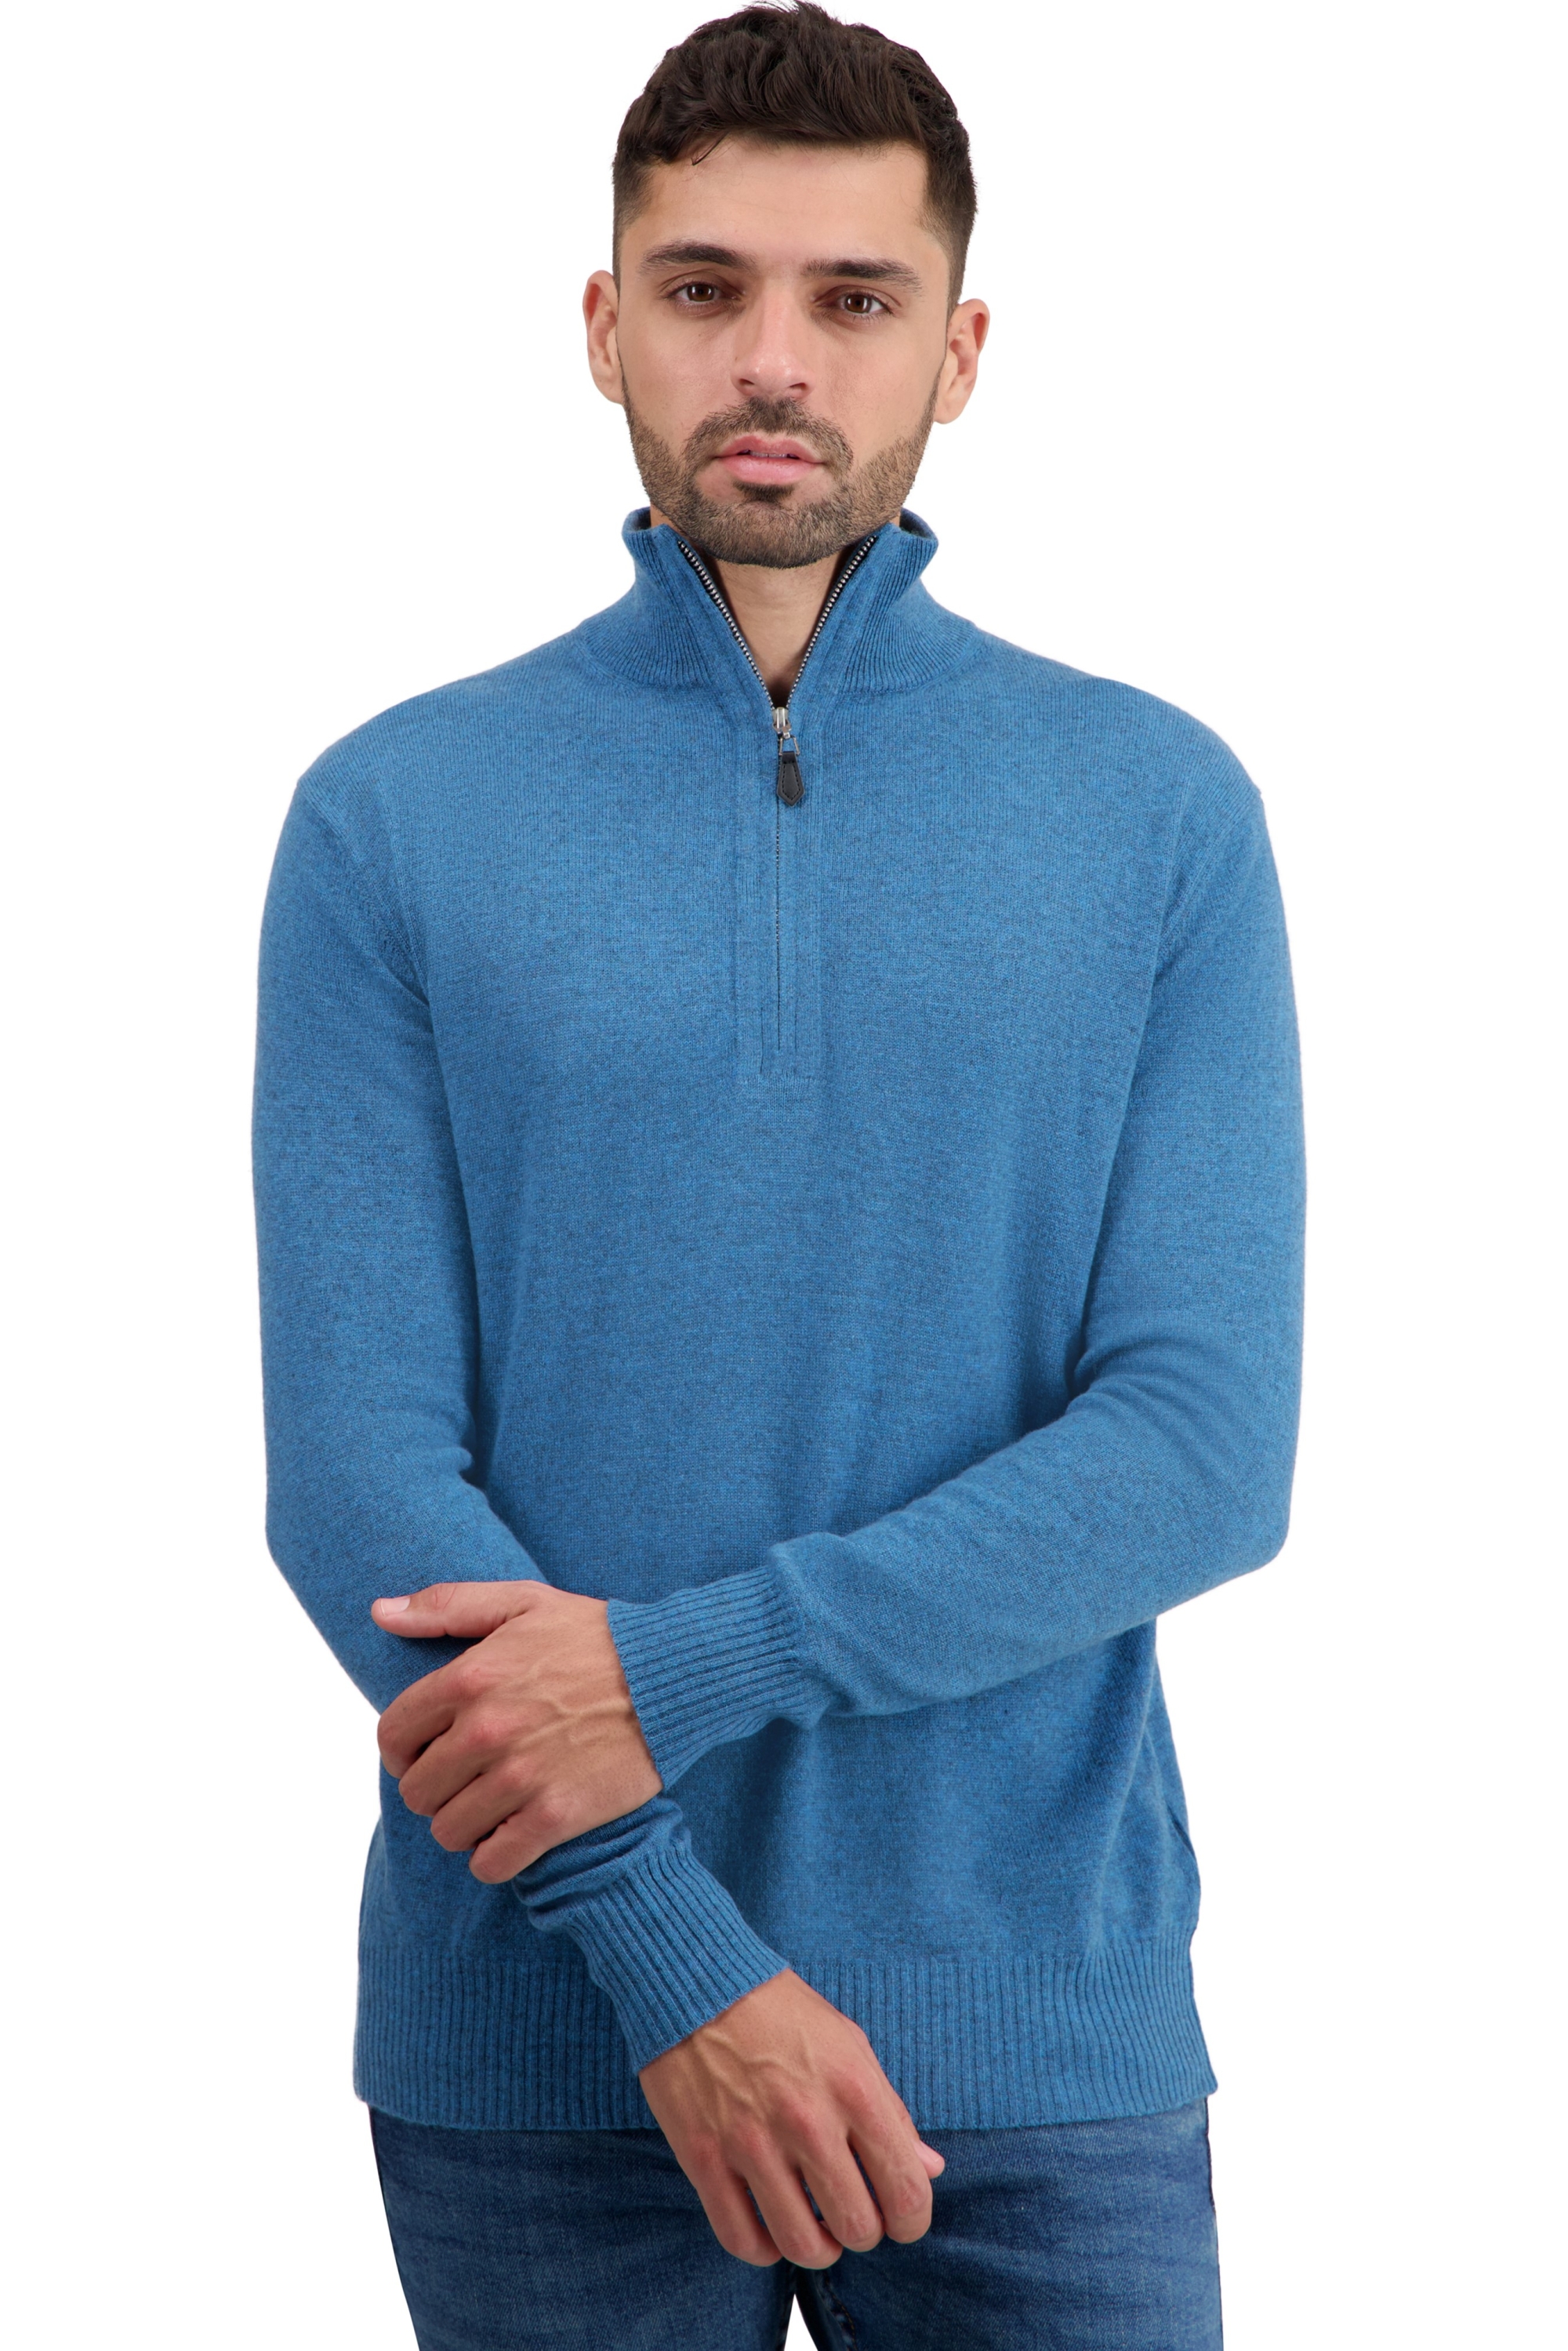 Cashmere men basic sweaters at low prices toulon first manor blue m